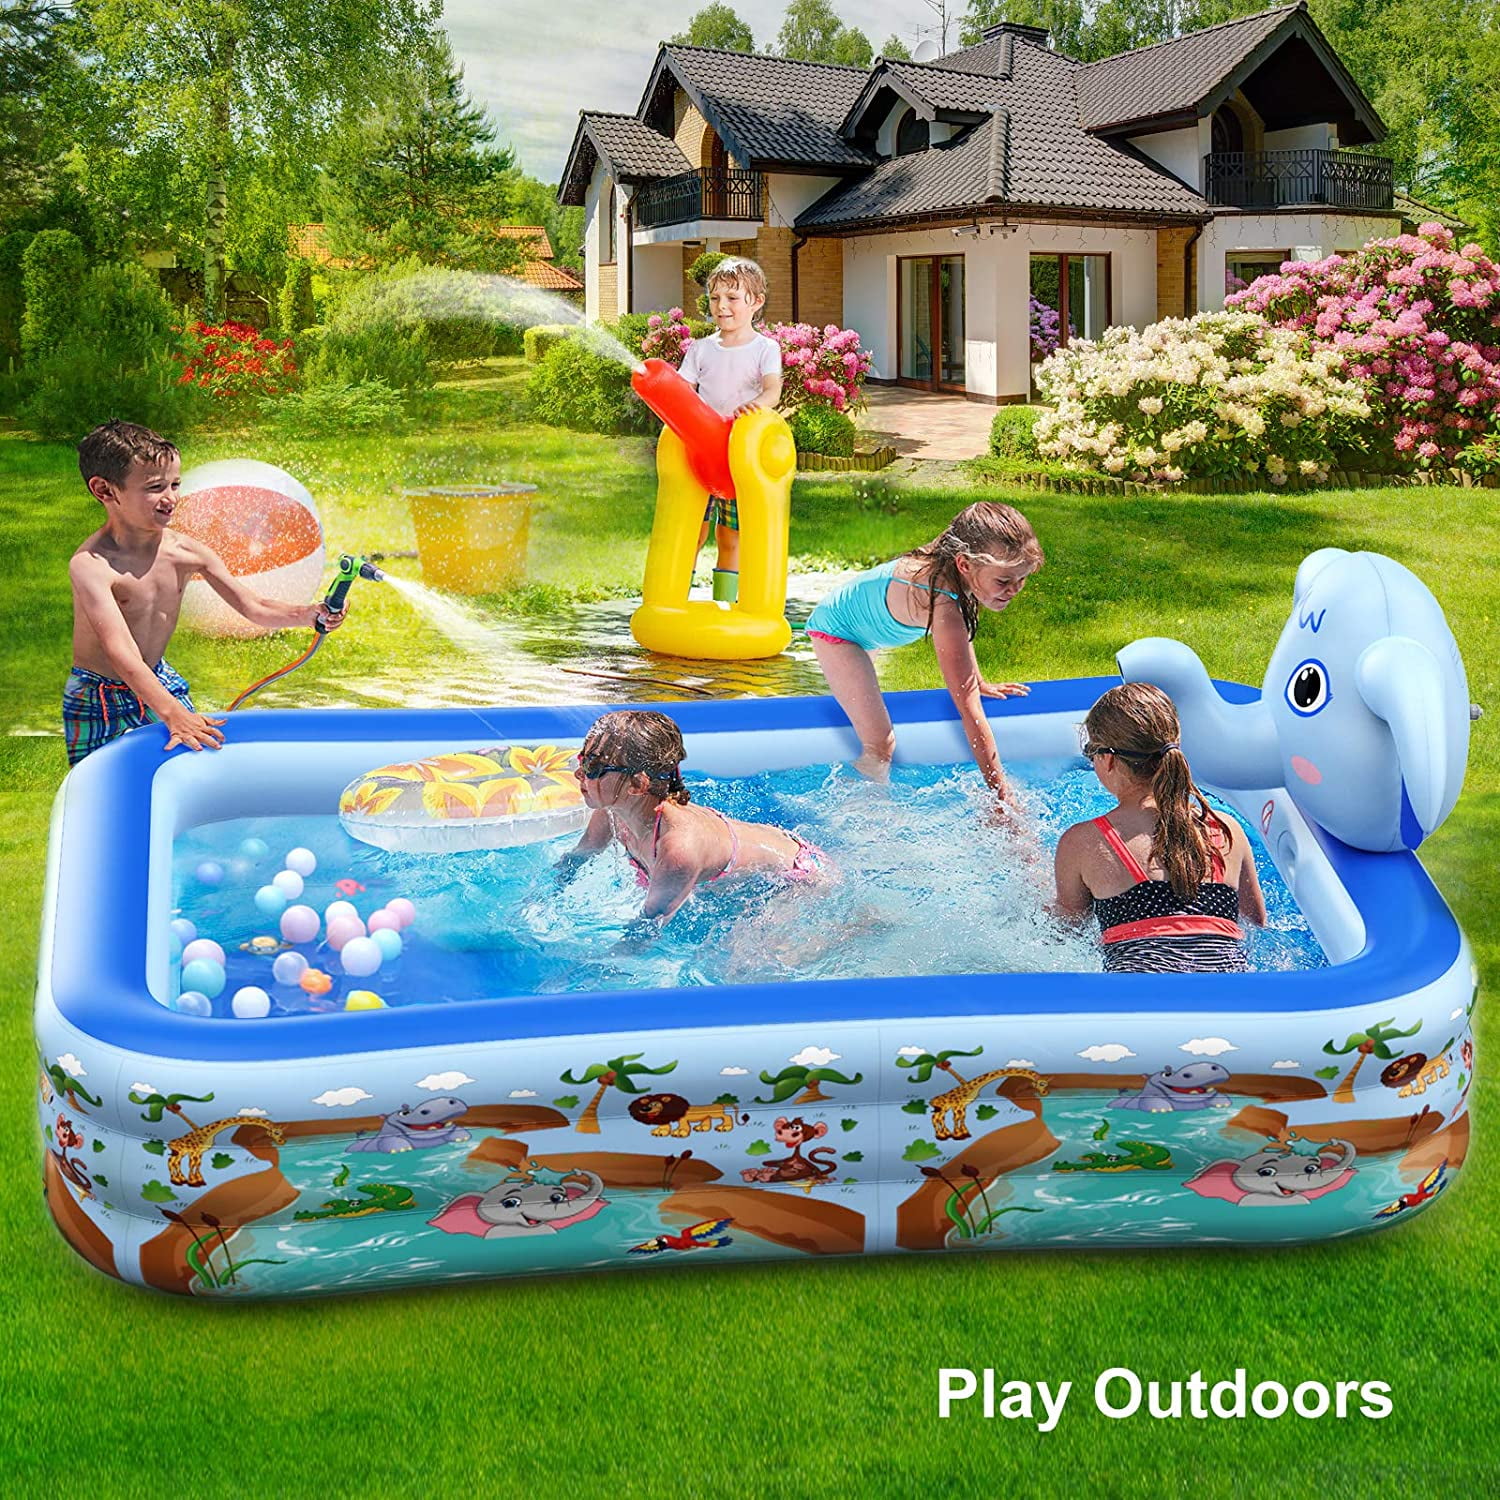 Kiddie Pools Full-Sized Inflatable Pools with Sprinkler Hamdol Inflatable Swimming Pools Outdoor Pools for Yard Water Party 99 X 72 X 22 Family Water Pools Blow up Pools for Adults Kids Toddlers 